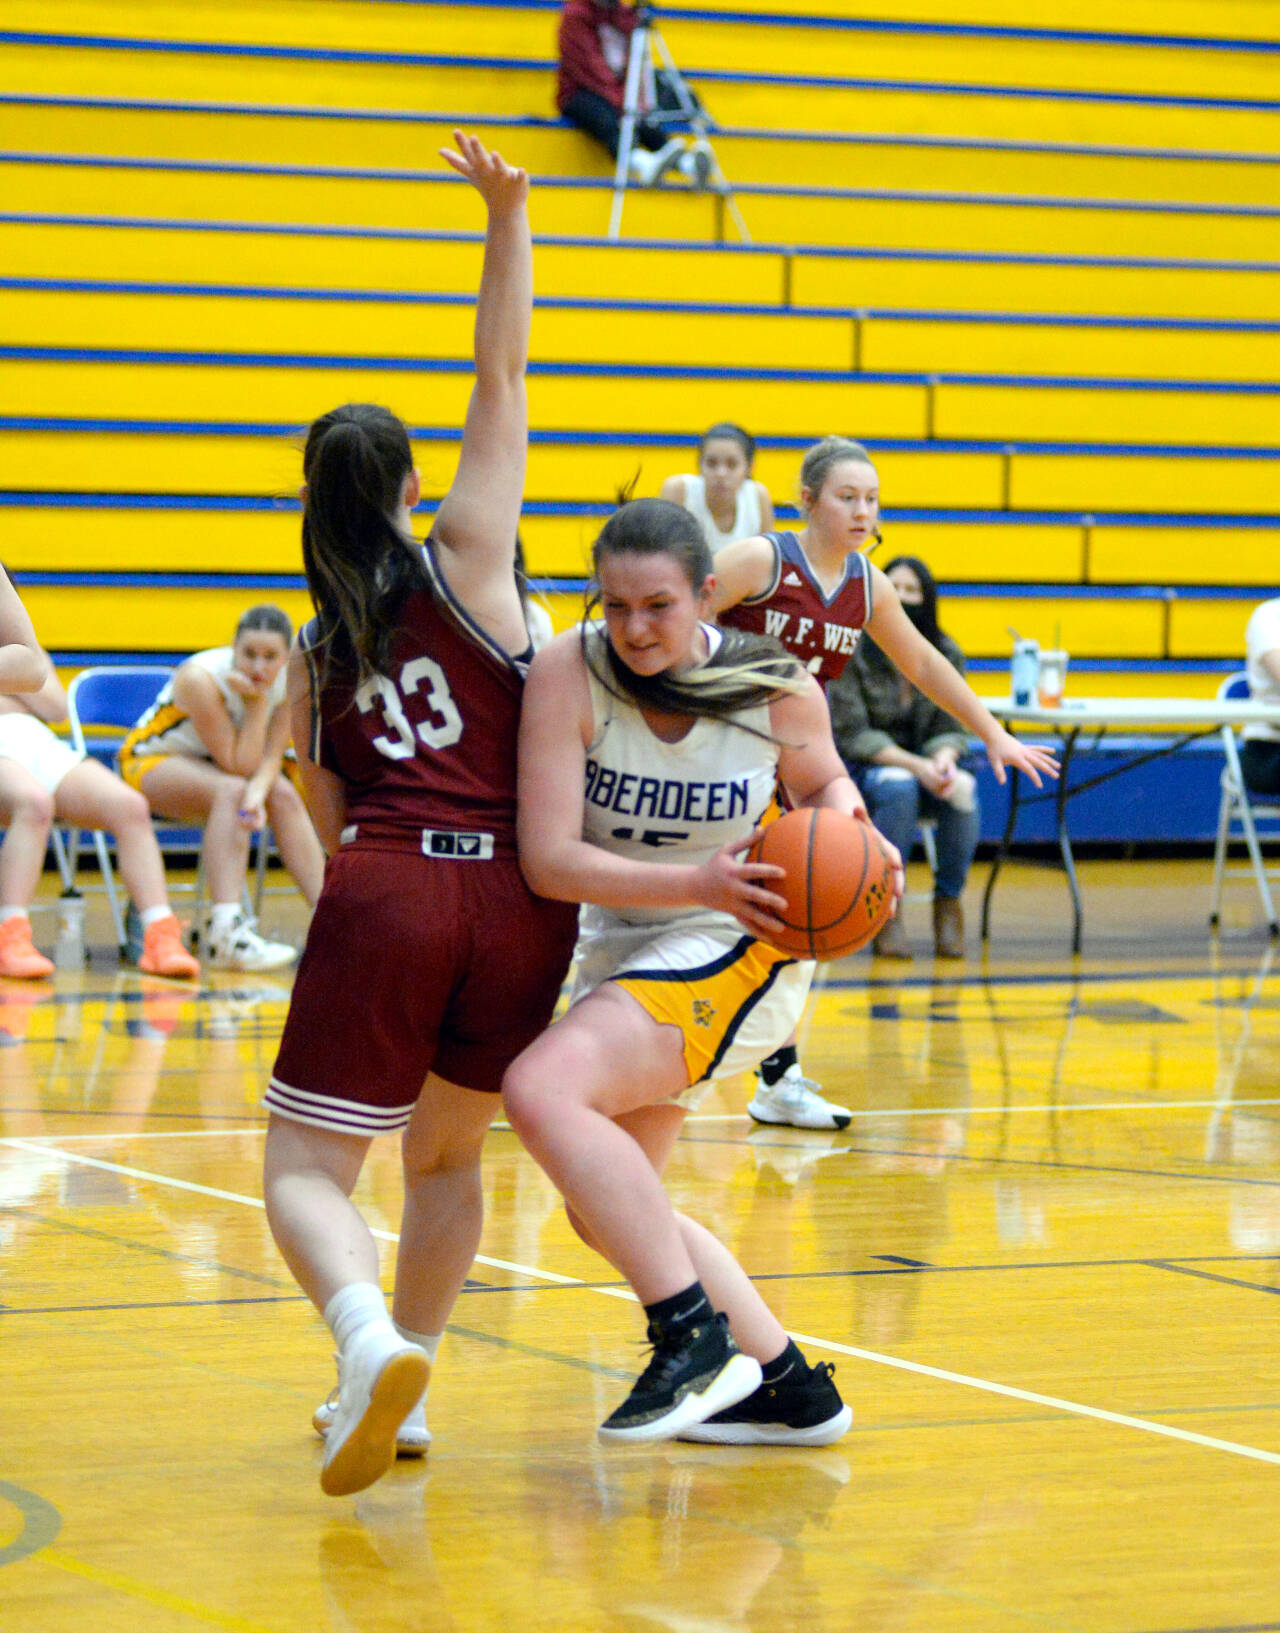 RYAN SPARKS | THE DAILY WORLD Aberdeen center Zoe Filan, right, maneuvers around WF West forward Maggie Bussee during Aberdeen’s 66-28 loss to WF West on Tuesday in Aberdeen.